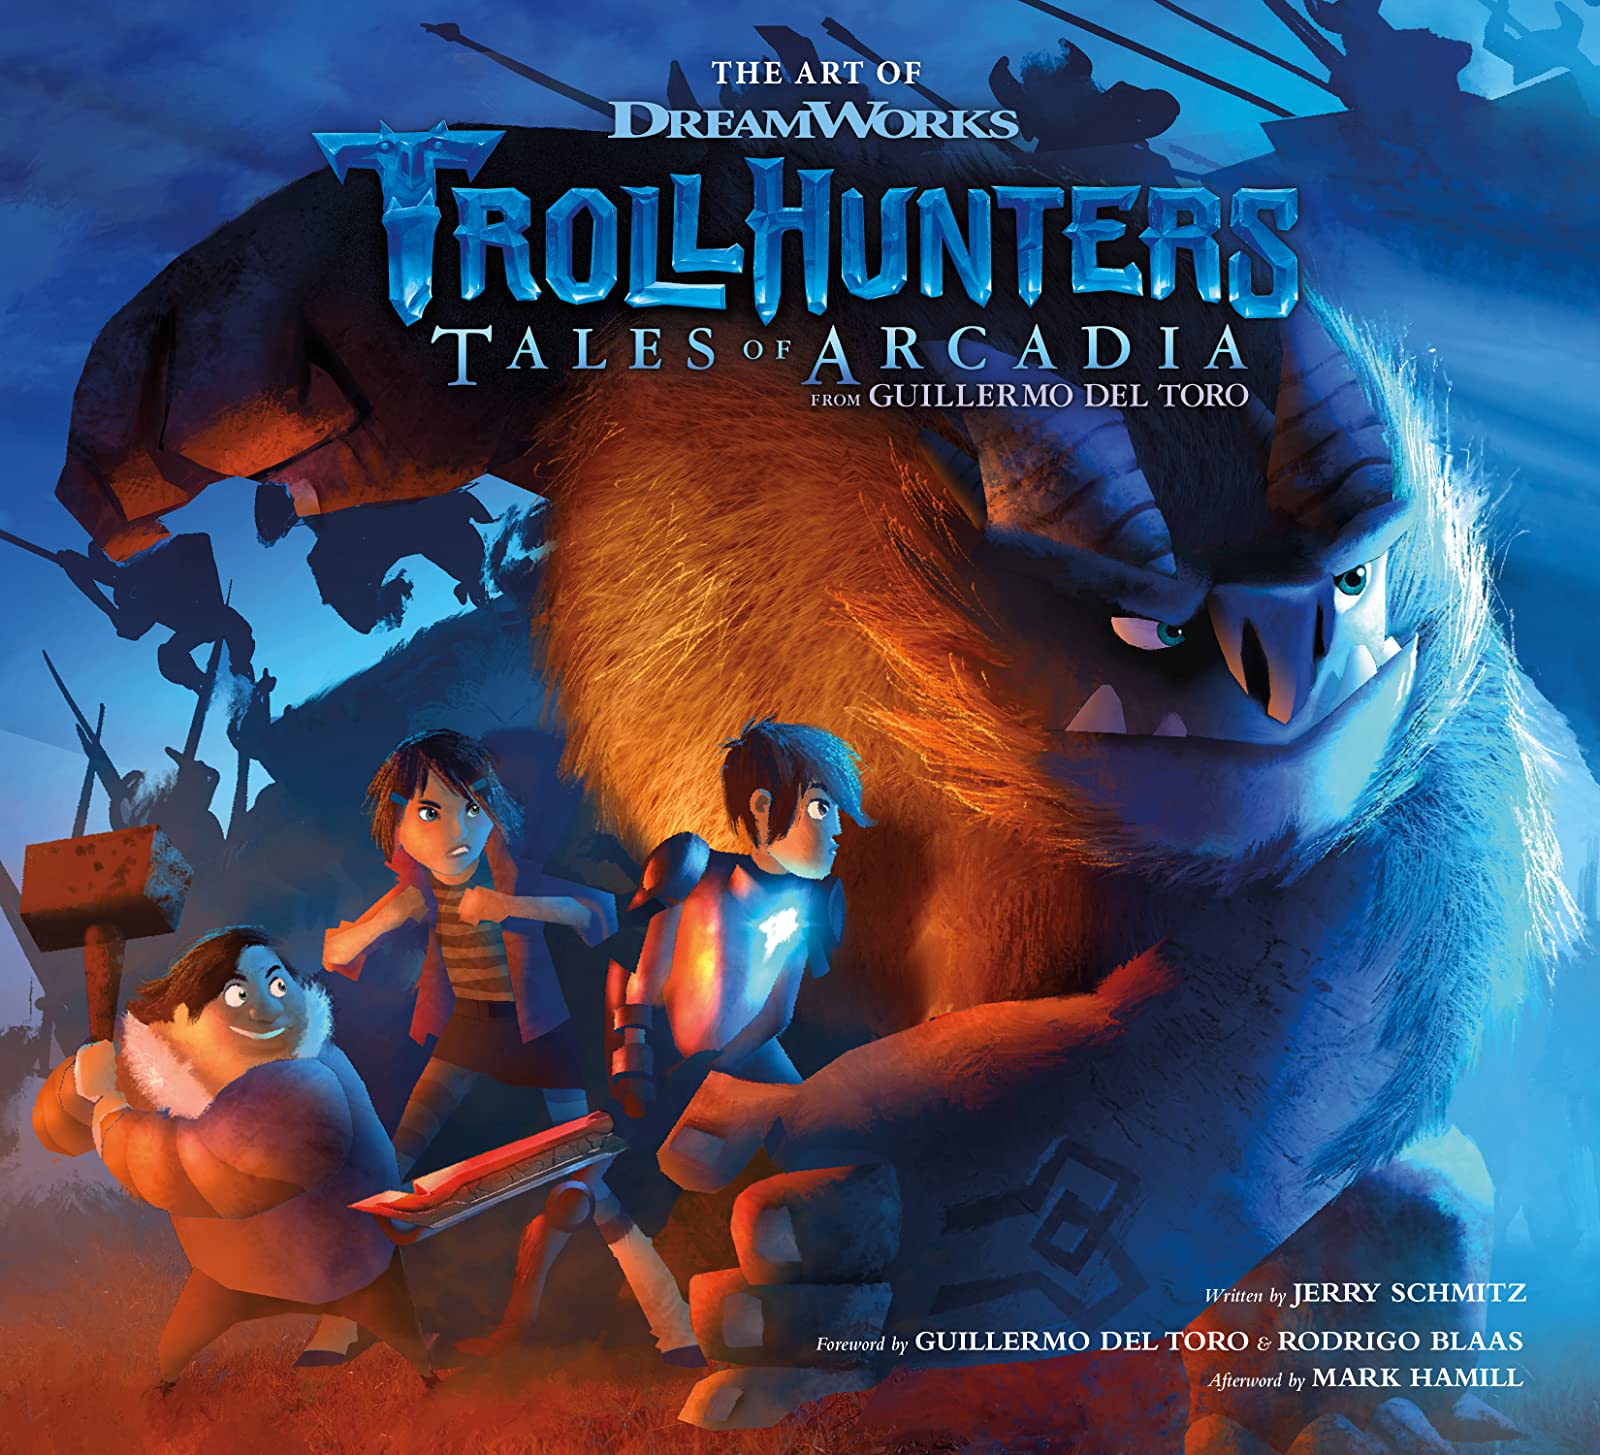 The Art of DreamWorks Trollhunters: Tales of Arcadia